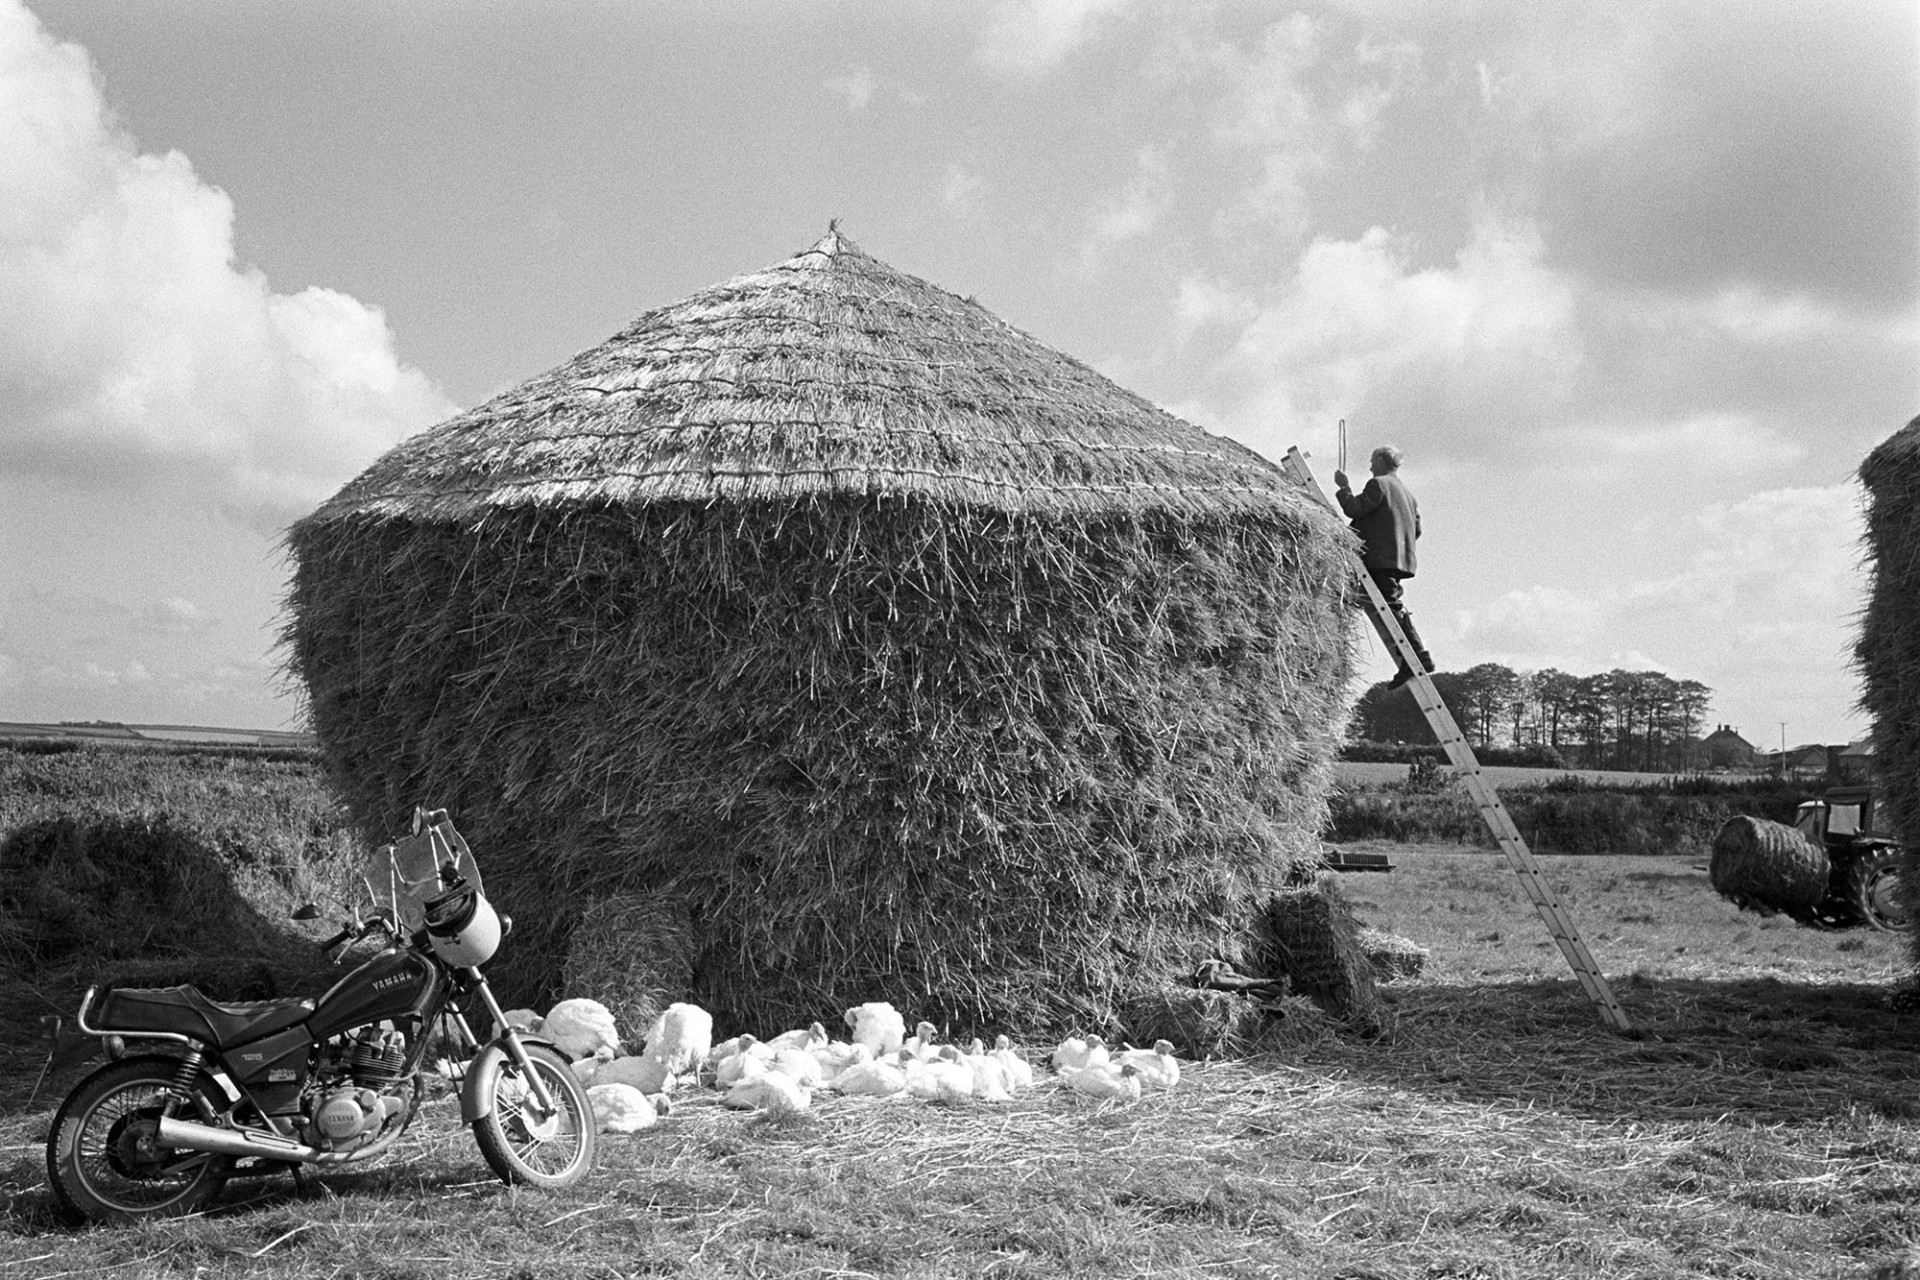 Thatcher thatching wheat rick, his motorbike parked in front. Young turkeys feeding. 
[Bill Hammond thatching a wheat rick in a field at Westacott, Riddlecombe. He is climbing a ladder propped against the rick, holding a spar. His motorcycle is parked beside the rick by a flock of turkeys feeding.]